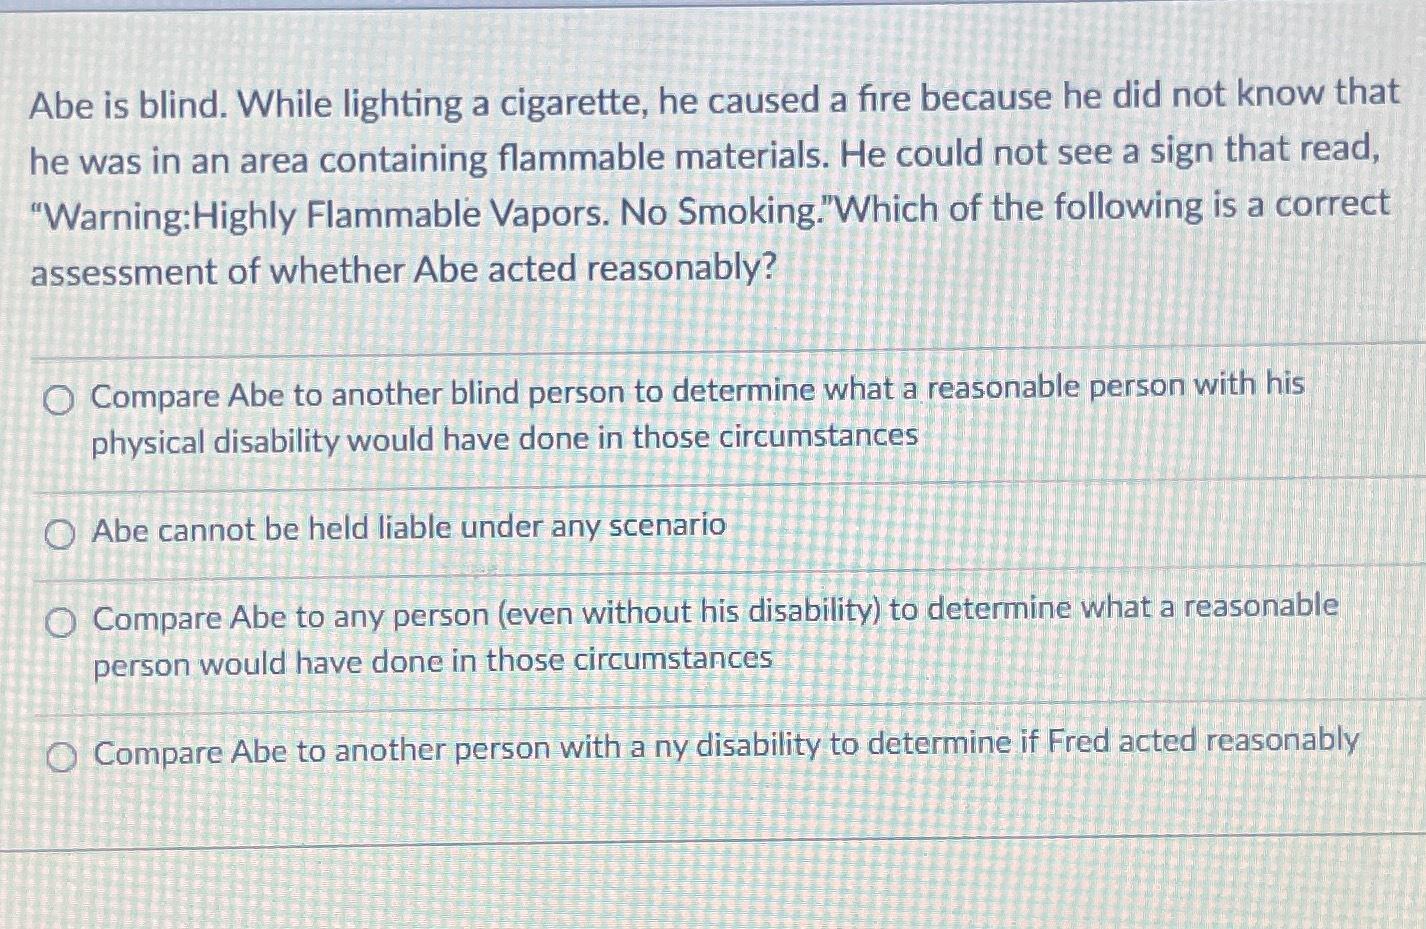 Abe is blind. While lighting a cigarette, he caused a fire because he did not know that he was in an area